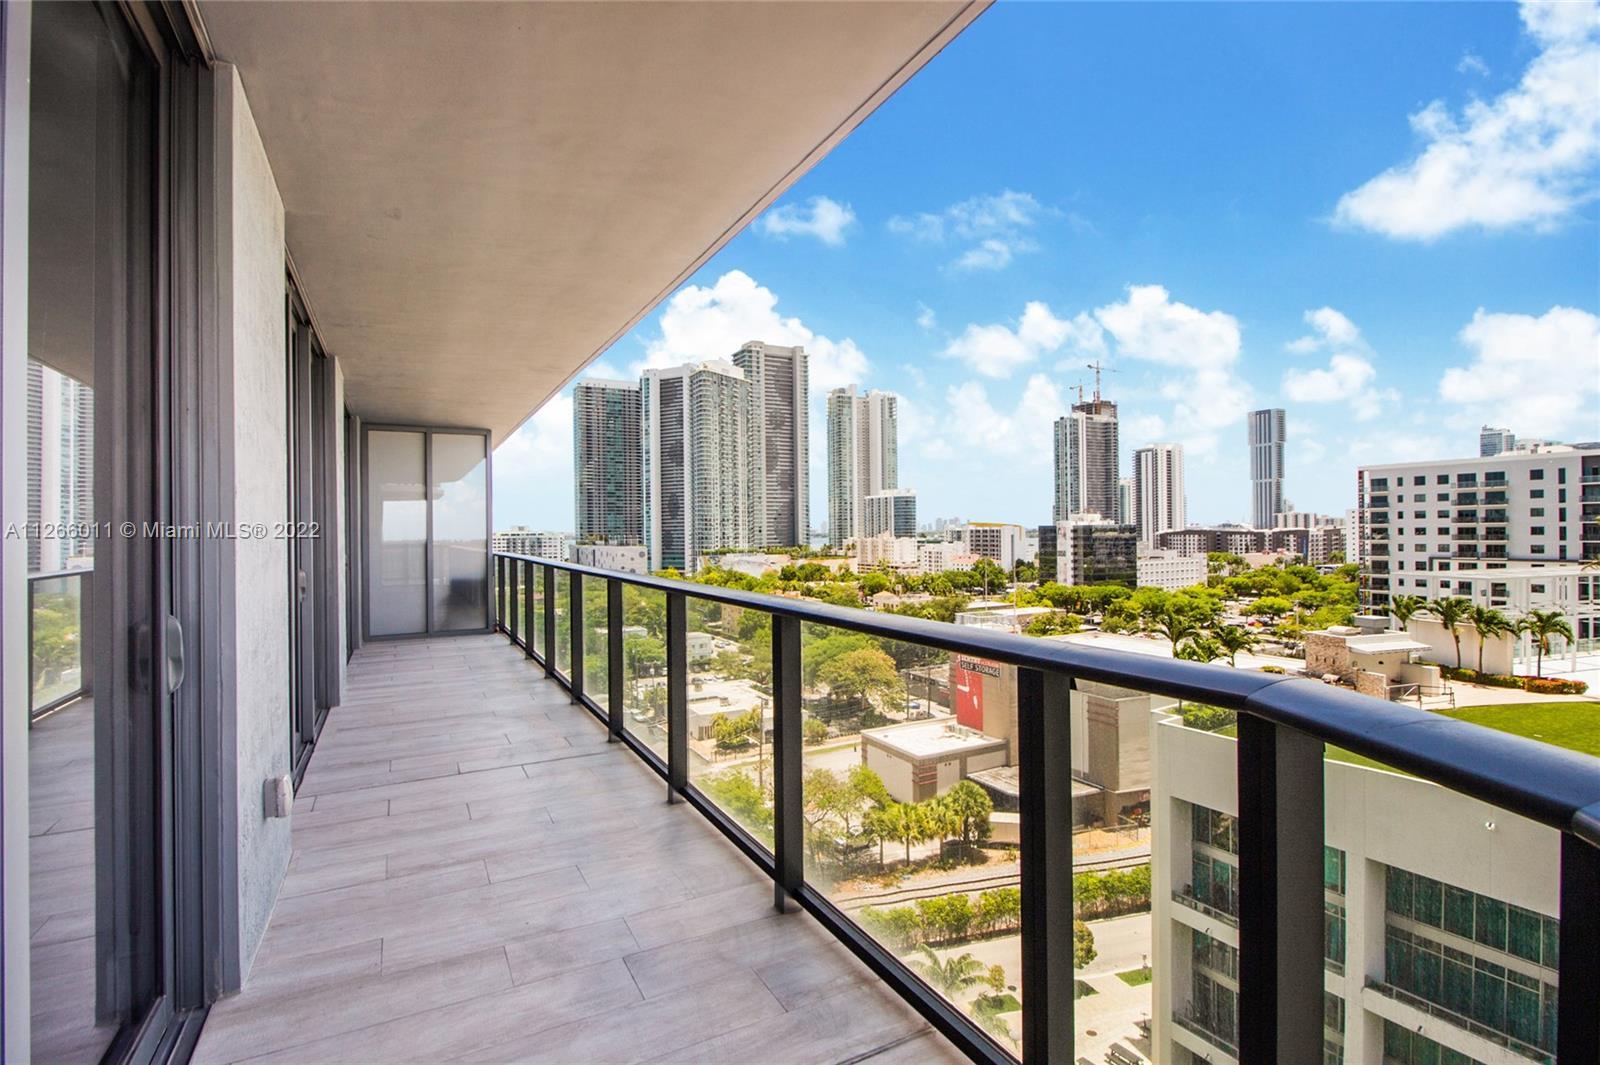 Located in the heart of Midtown, with restaurants, shops. Newer construction at the Hyde Residence a